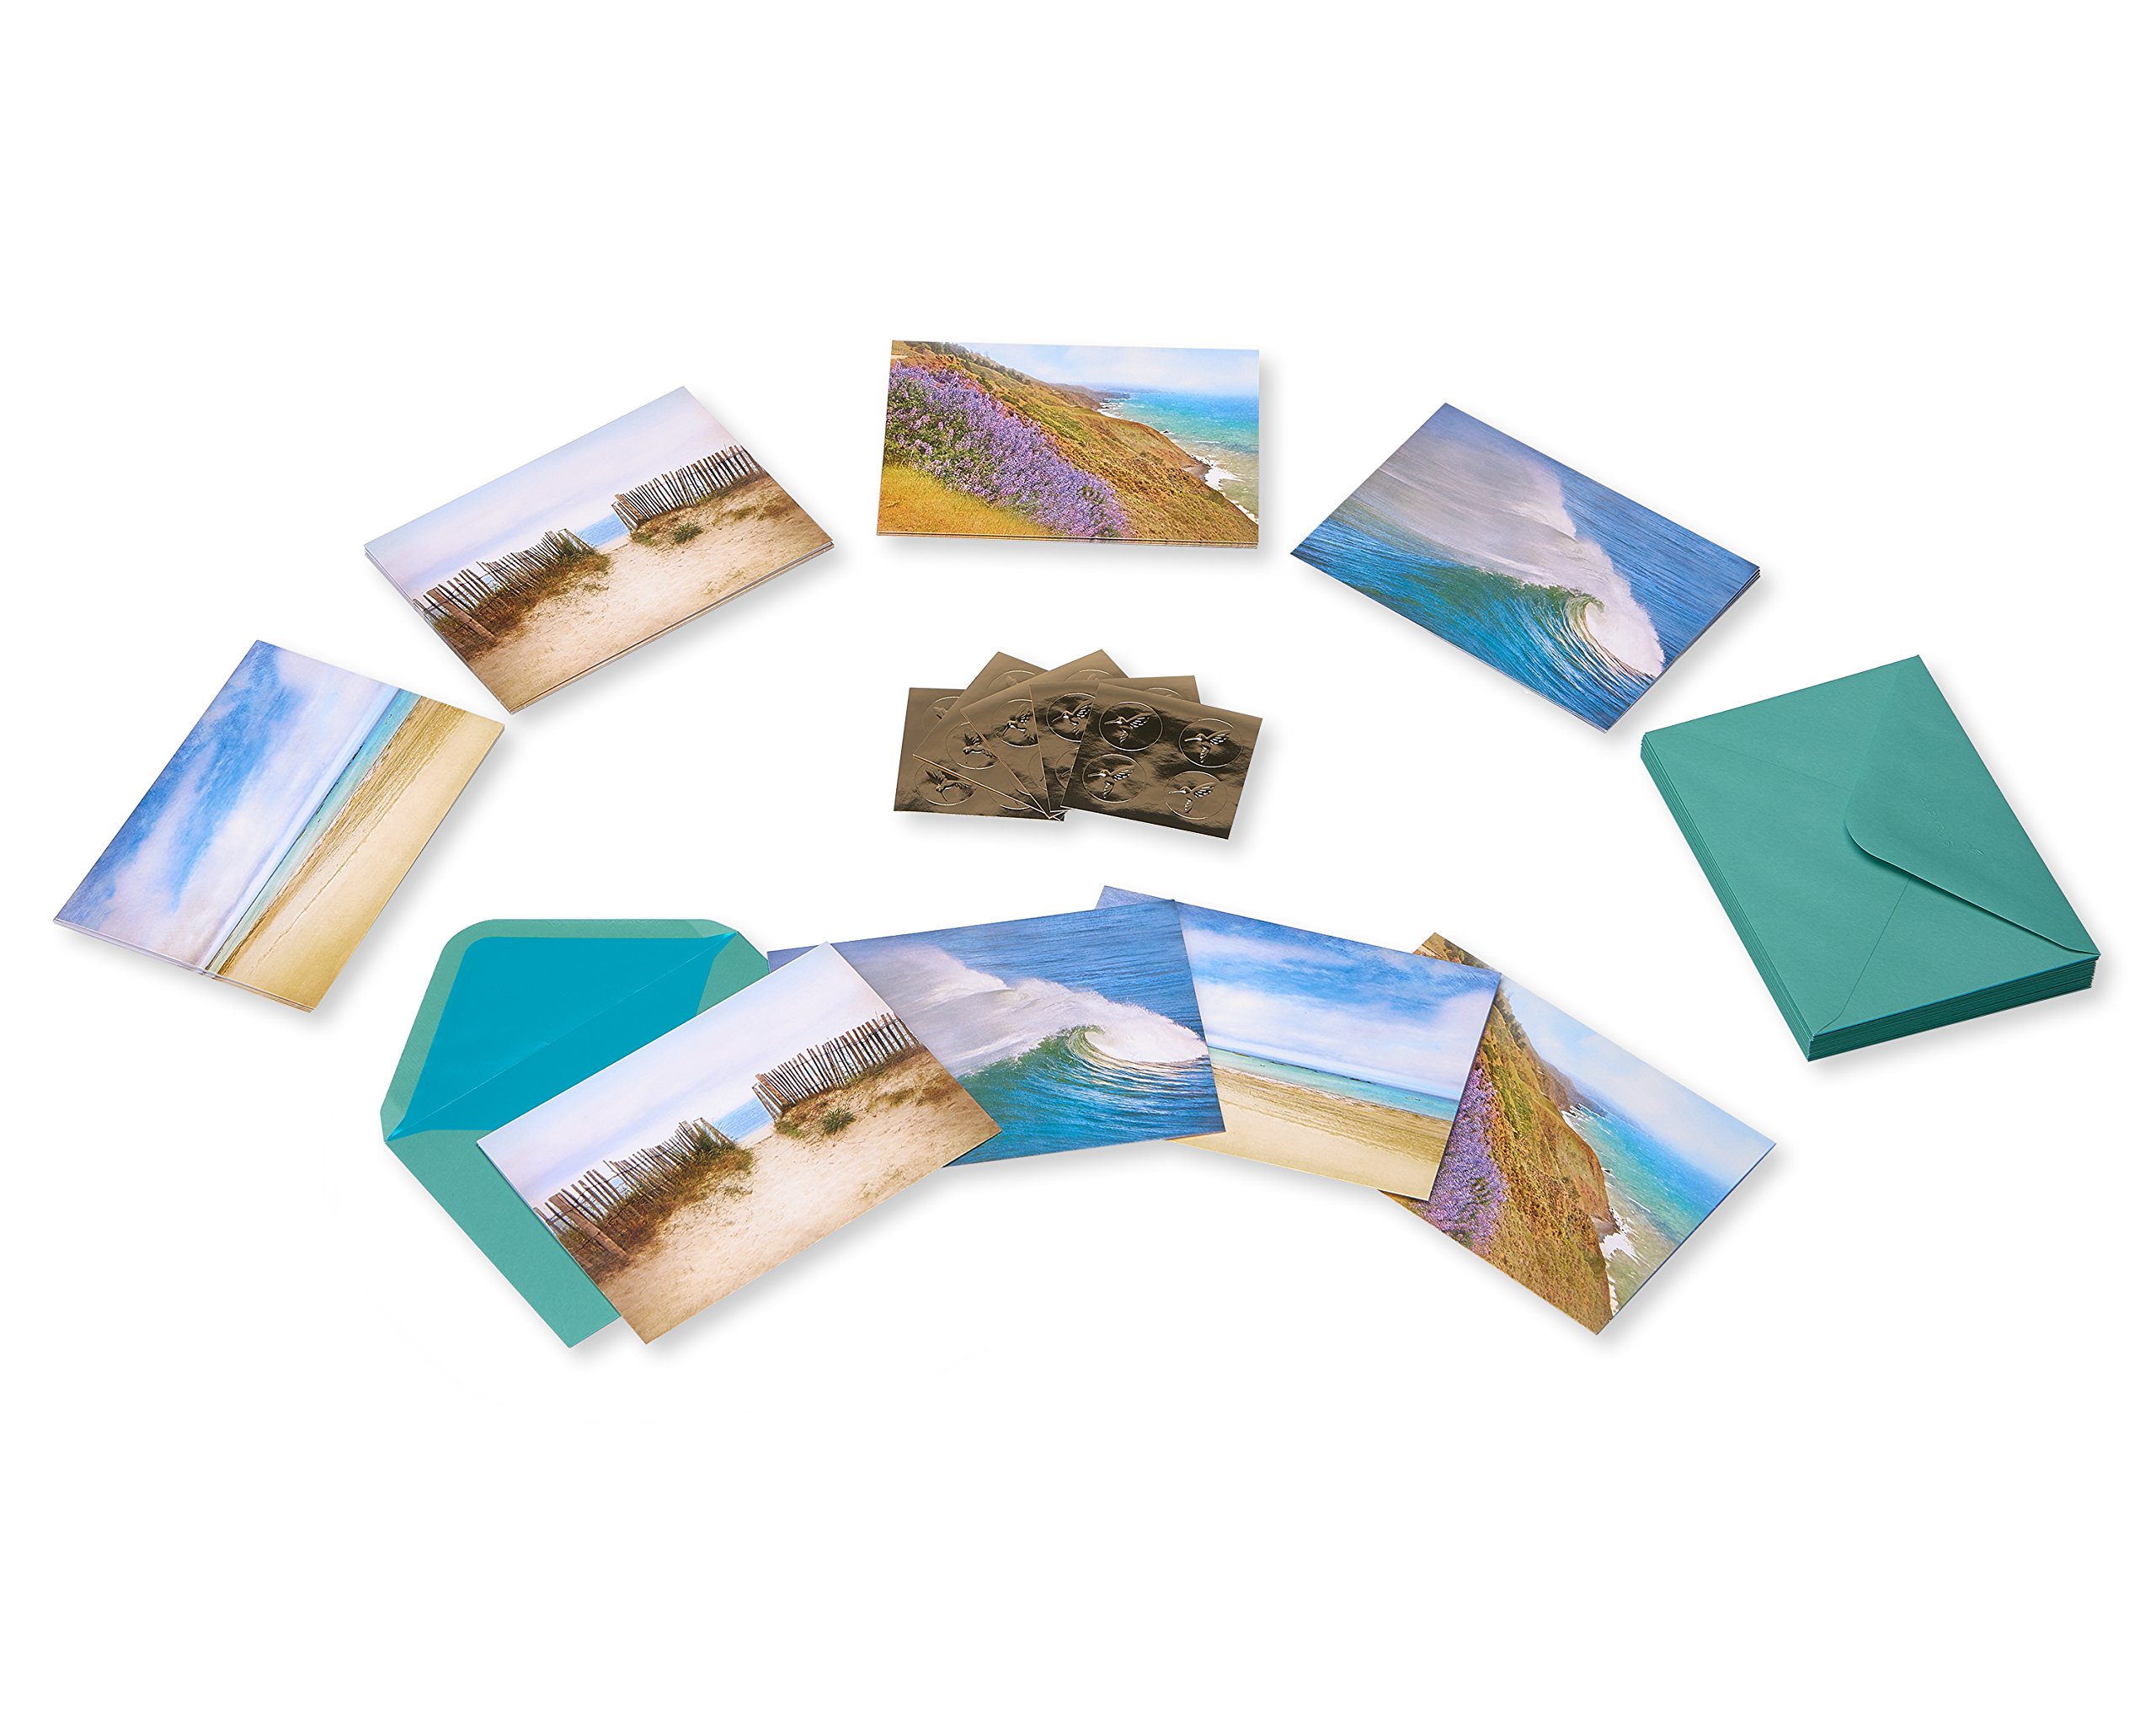 Papyrus Blank Cards with Keepsake Box, By the Sea (20-Count)